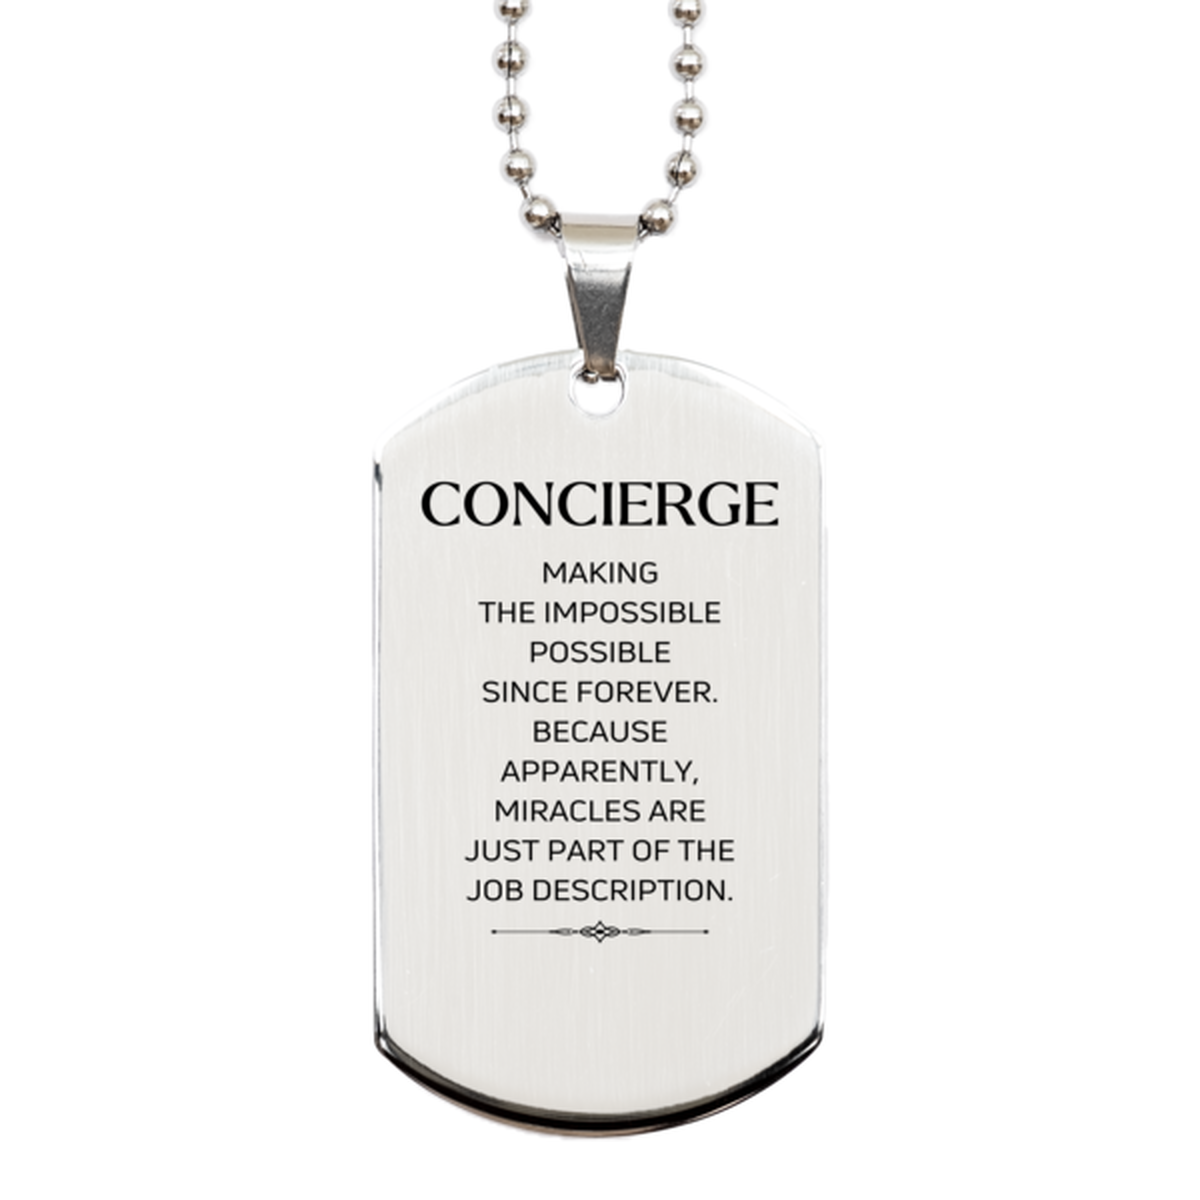 Funny Concierge Gifts, Miracles are just part of the job description, Inspirational Birthday Silver Dog Tag For Concierge, Men, Women, Coworkers, Friends, Boss